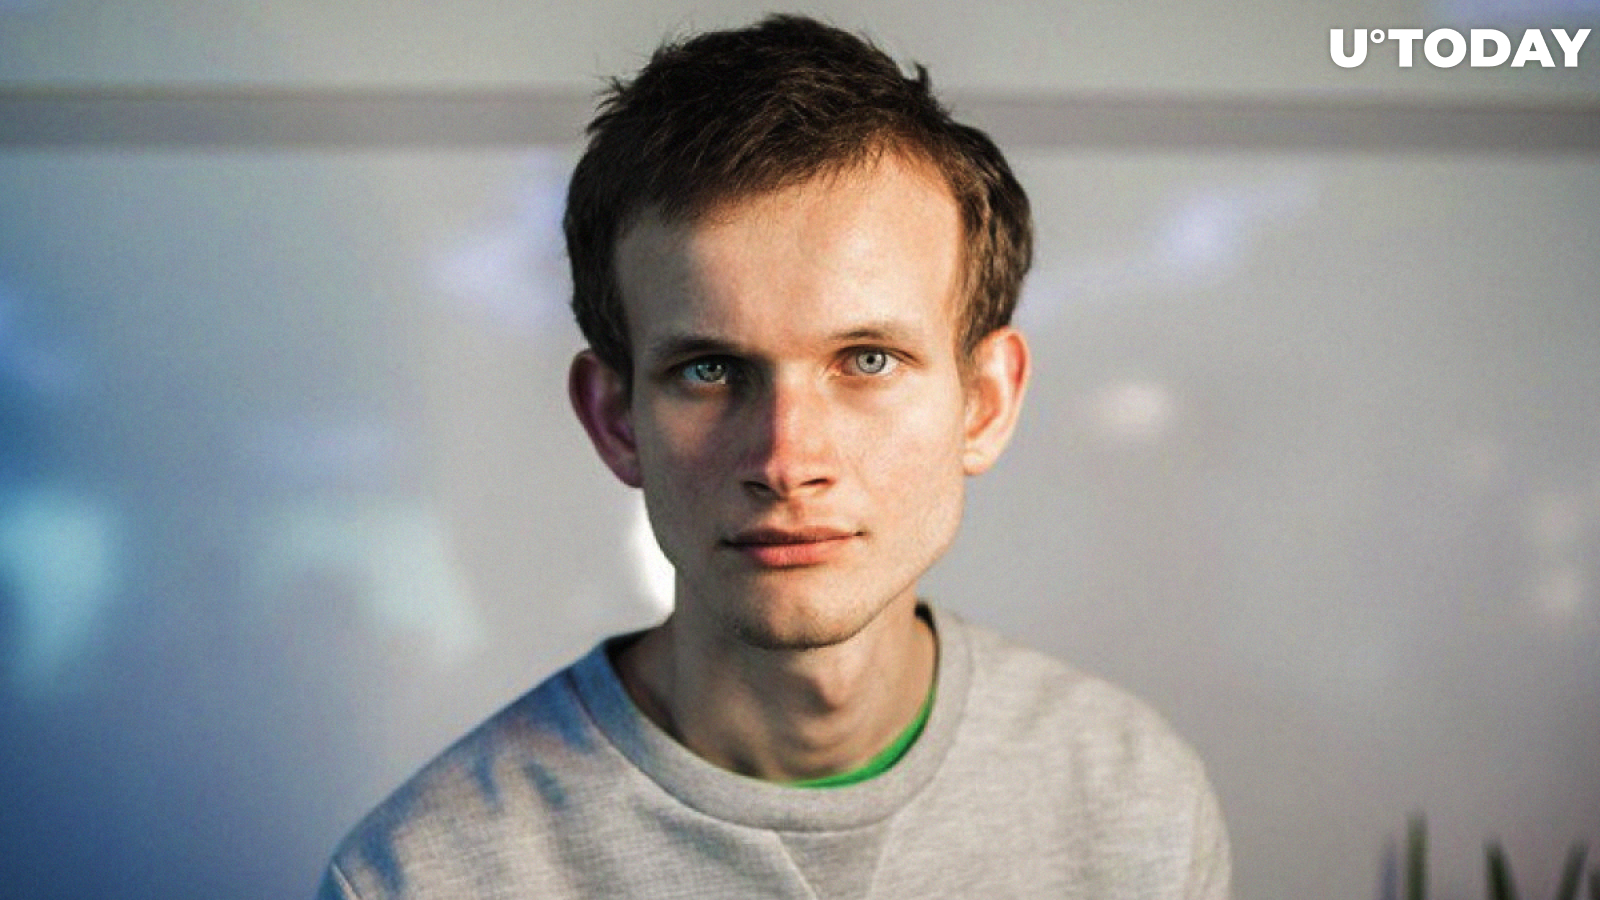 Ethereum's (ETH) Vitalik Buterin Proposes Construction to Protect Against 51% Attacks on Blockchains